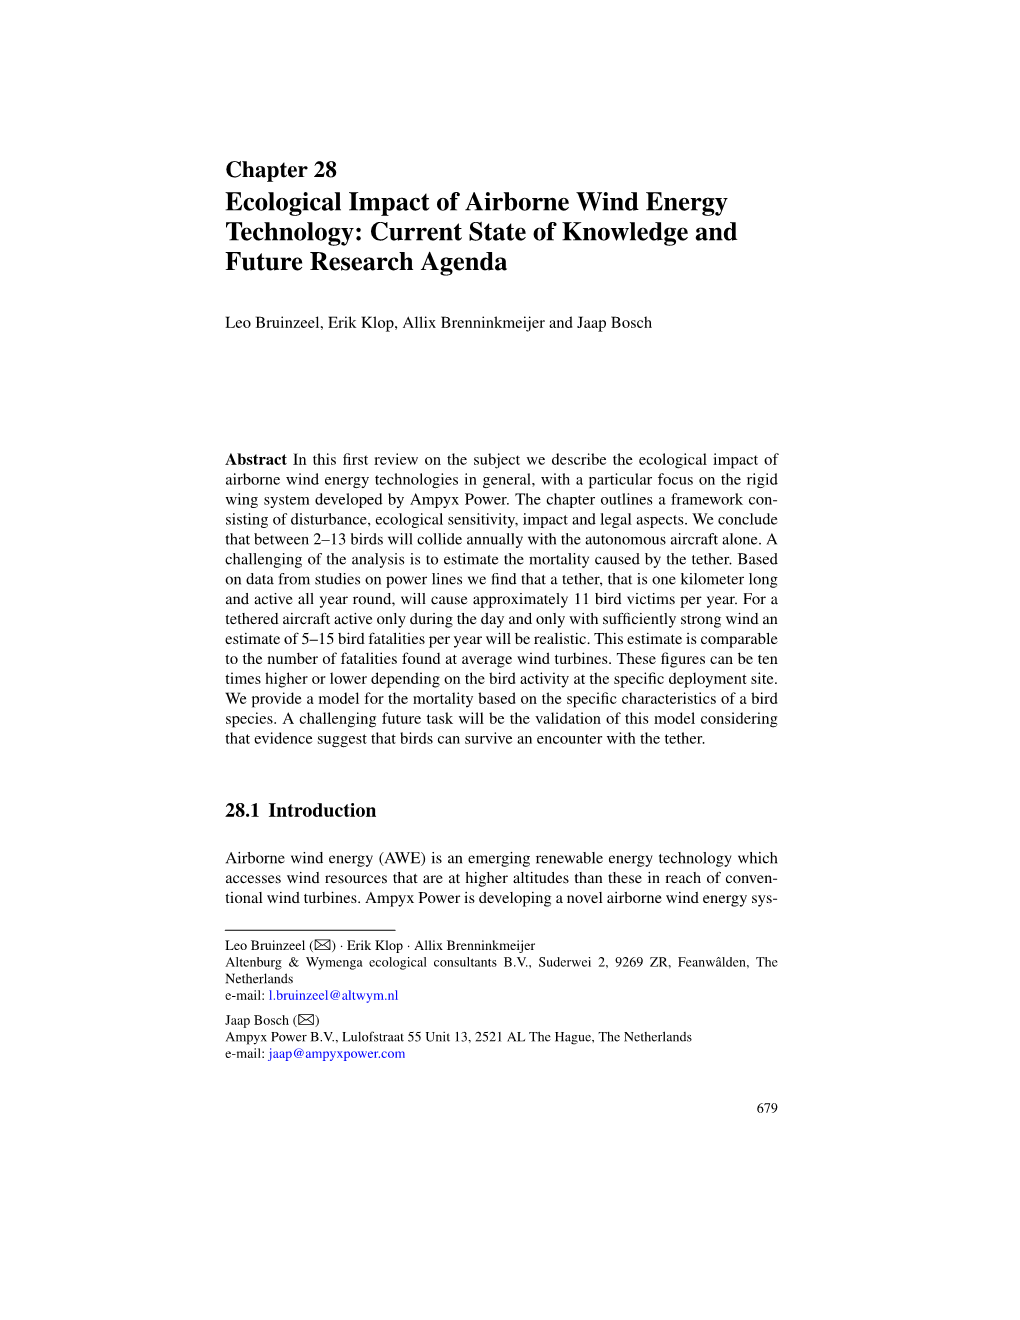 Ecological Impact of Airborne Wind Energy Technology: Current State of Knowledge and Future Research Agenda